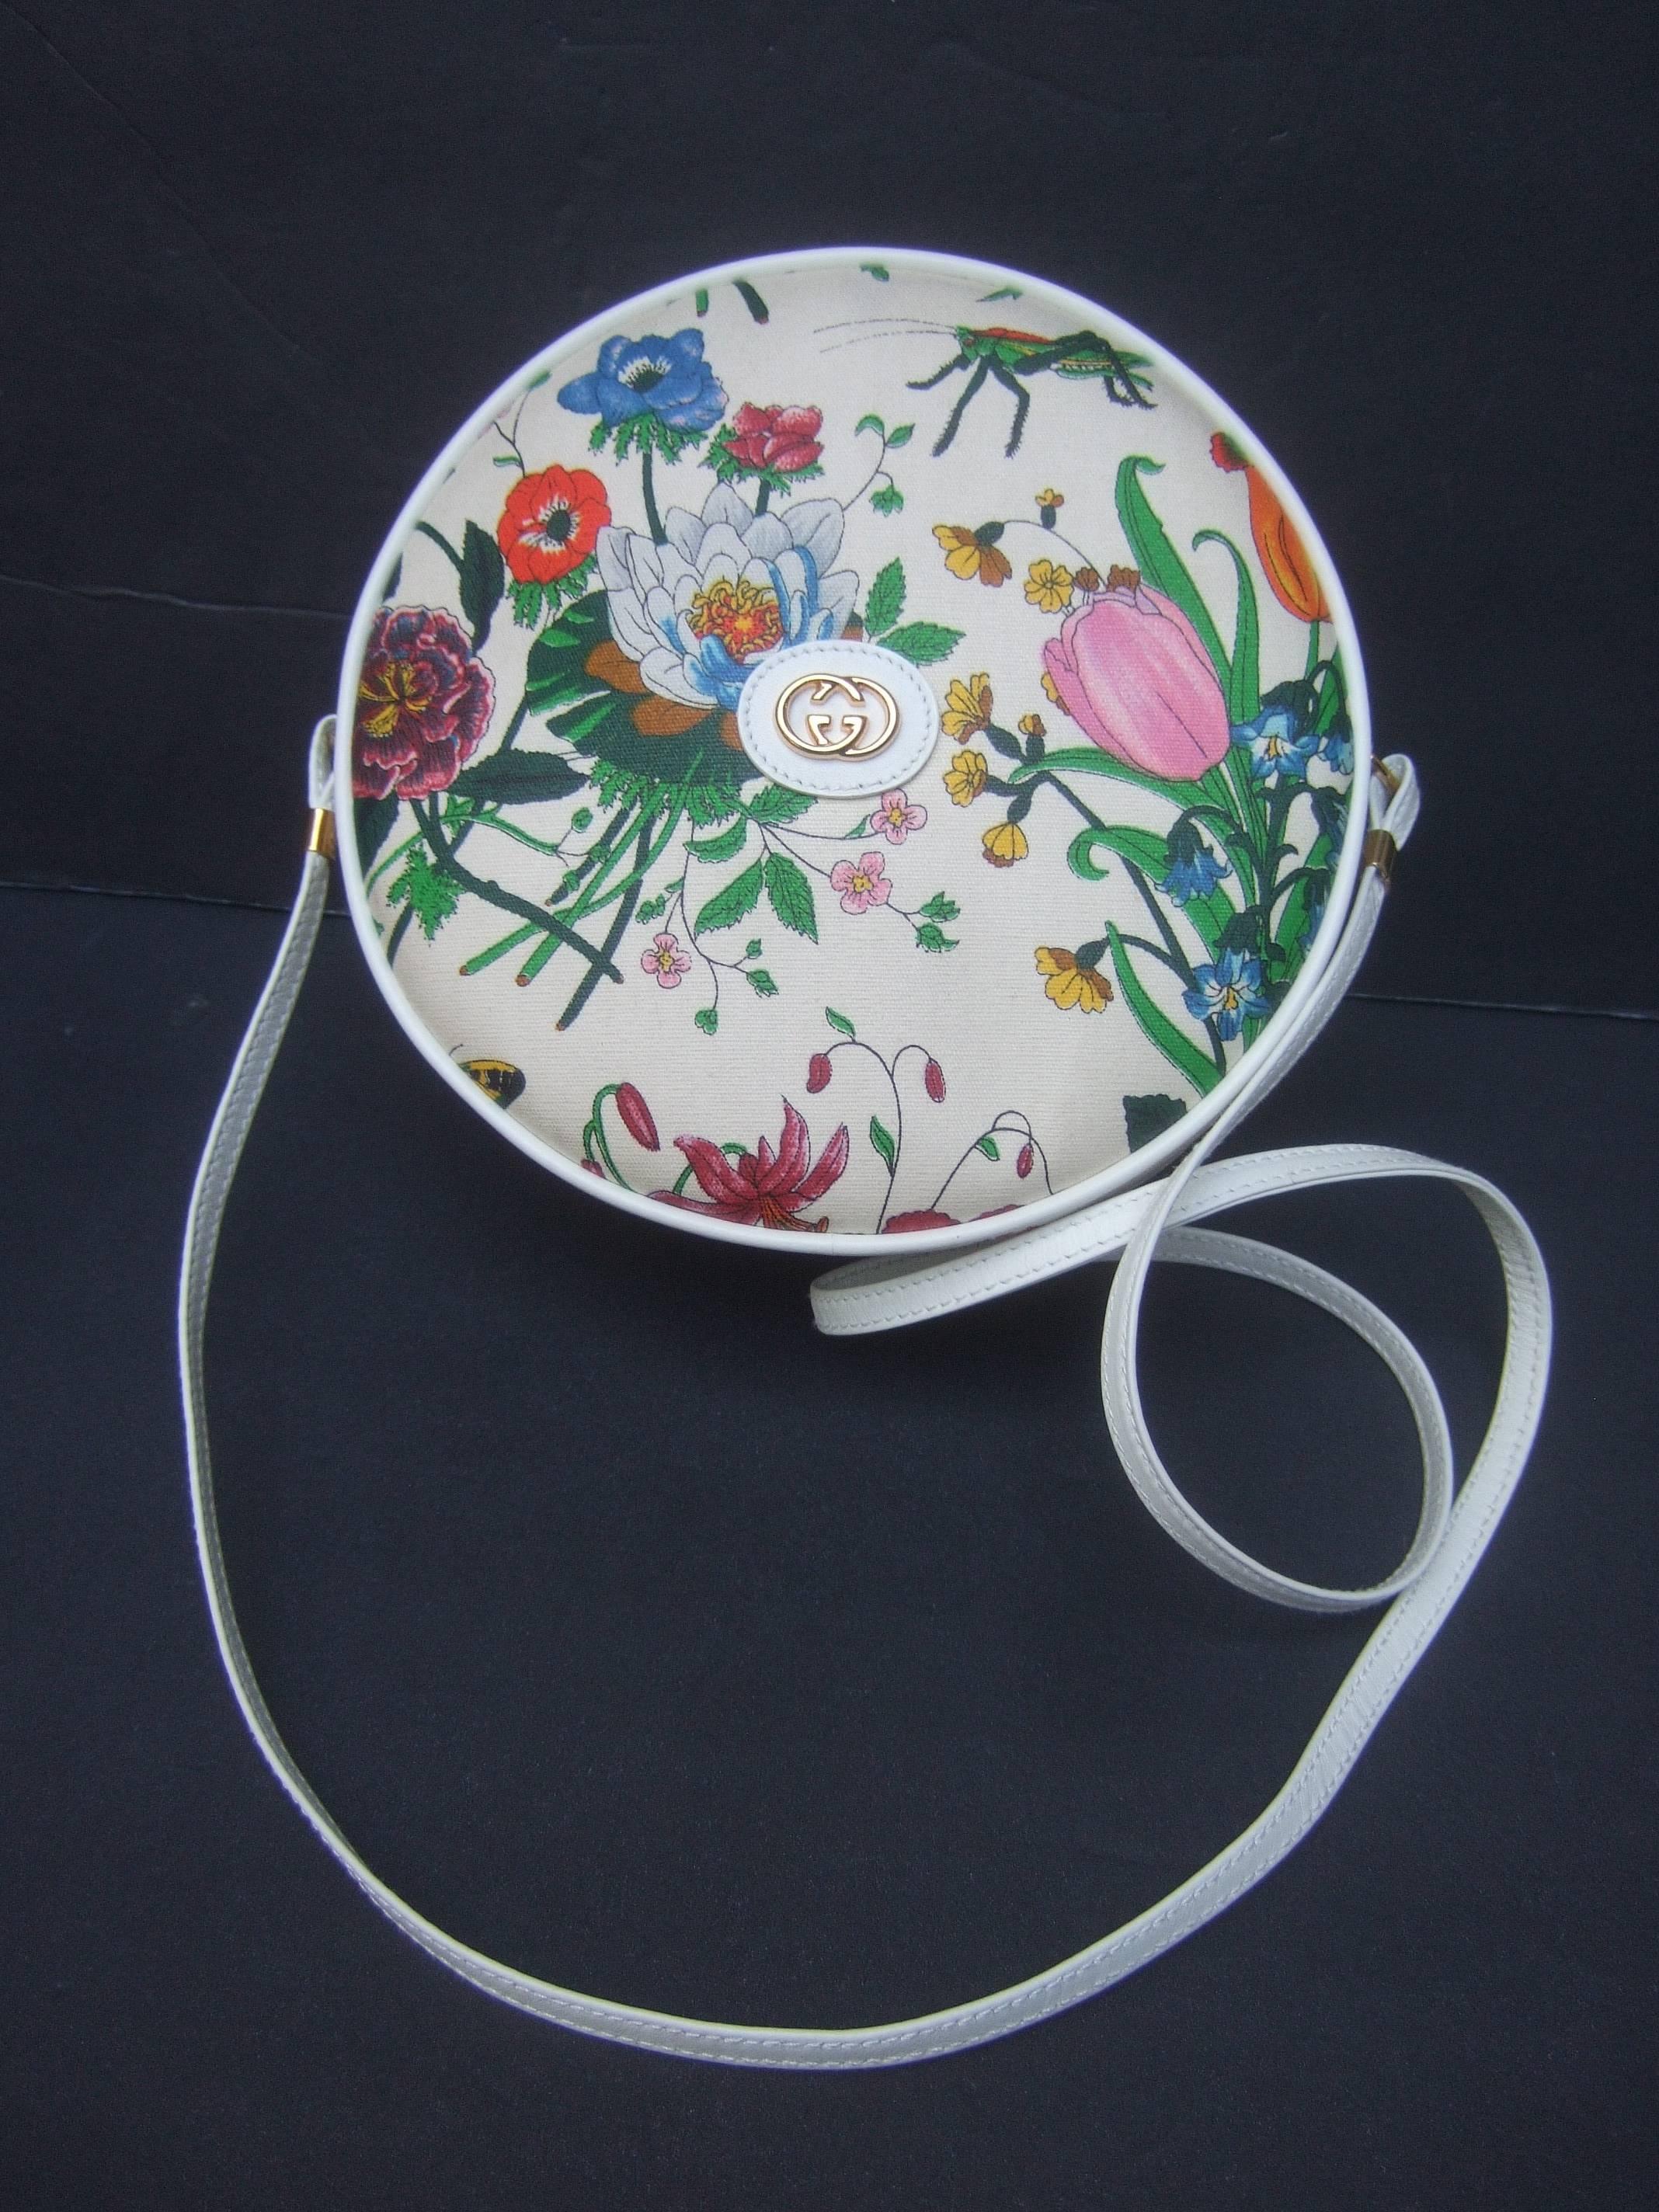 Gucci Rare flora canteen shoulder bag c 1970s
The stylish Italian handbag is designed
with a field of flower blooms that burst
against the white coated canvas covering

Concealed within the garden of flowers 
are a few grasshoppers, beetles